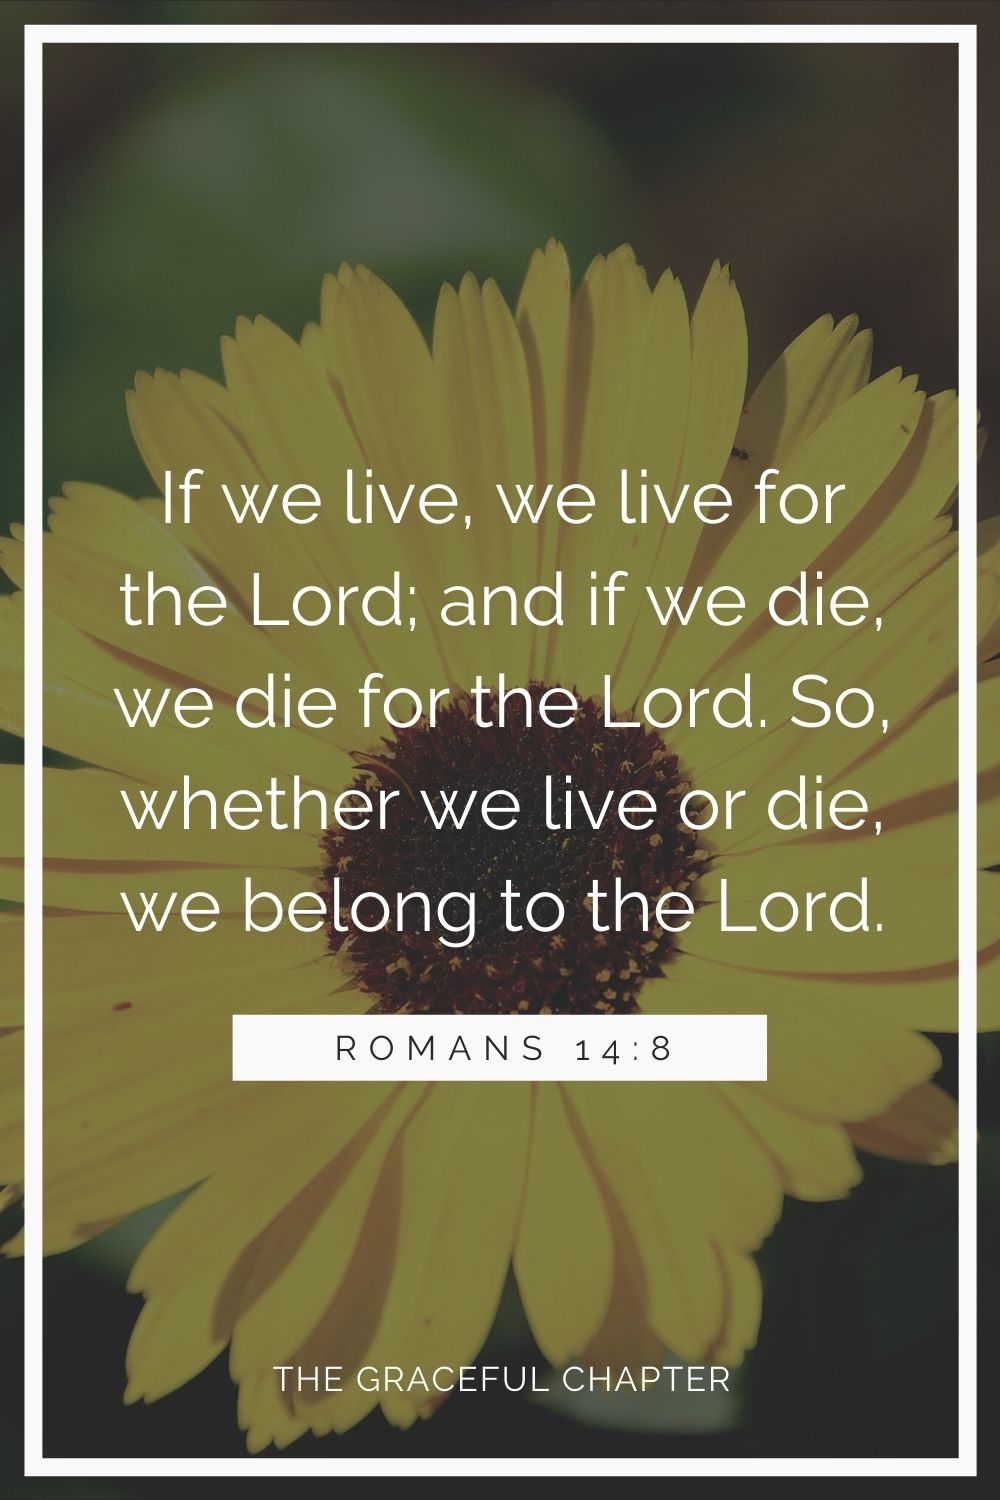 If we live, we live for the Lord; and if we die, we die for the Lord. So, whether we live or die, we belong to the Lord. Romans 14:8